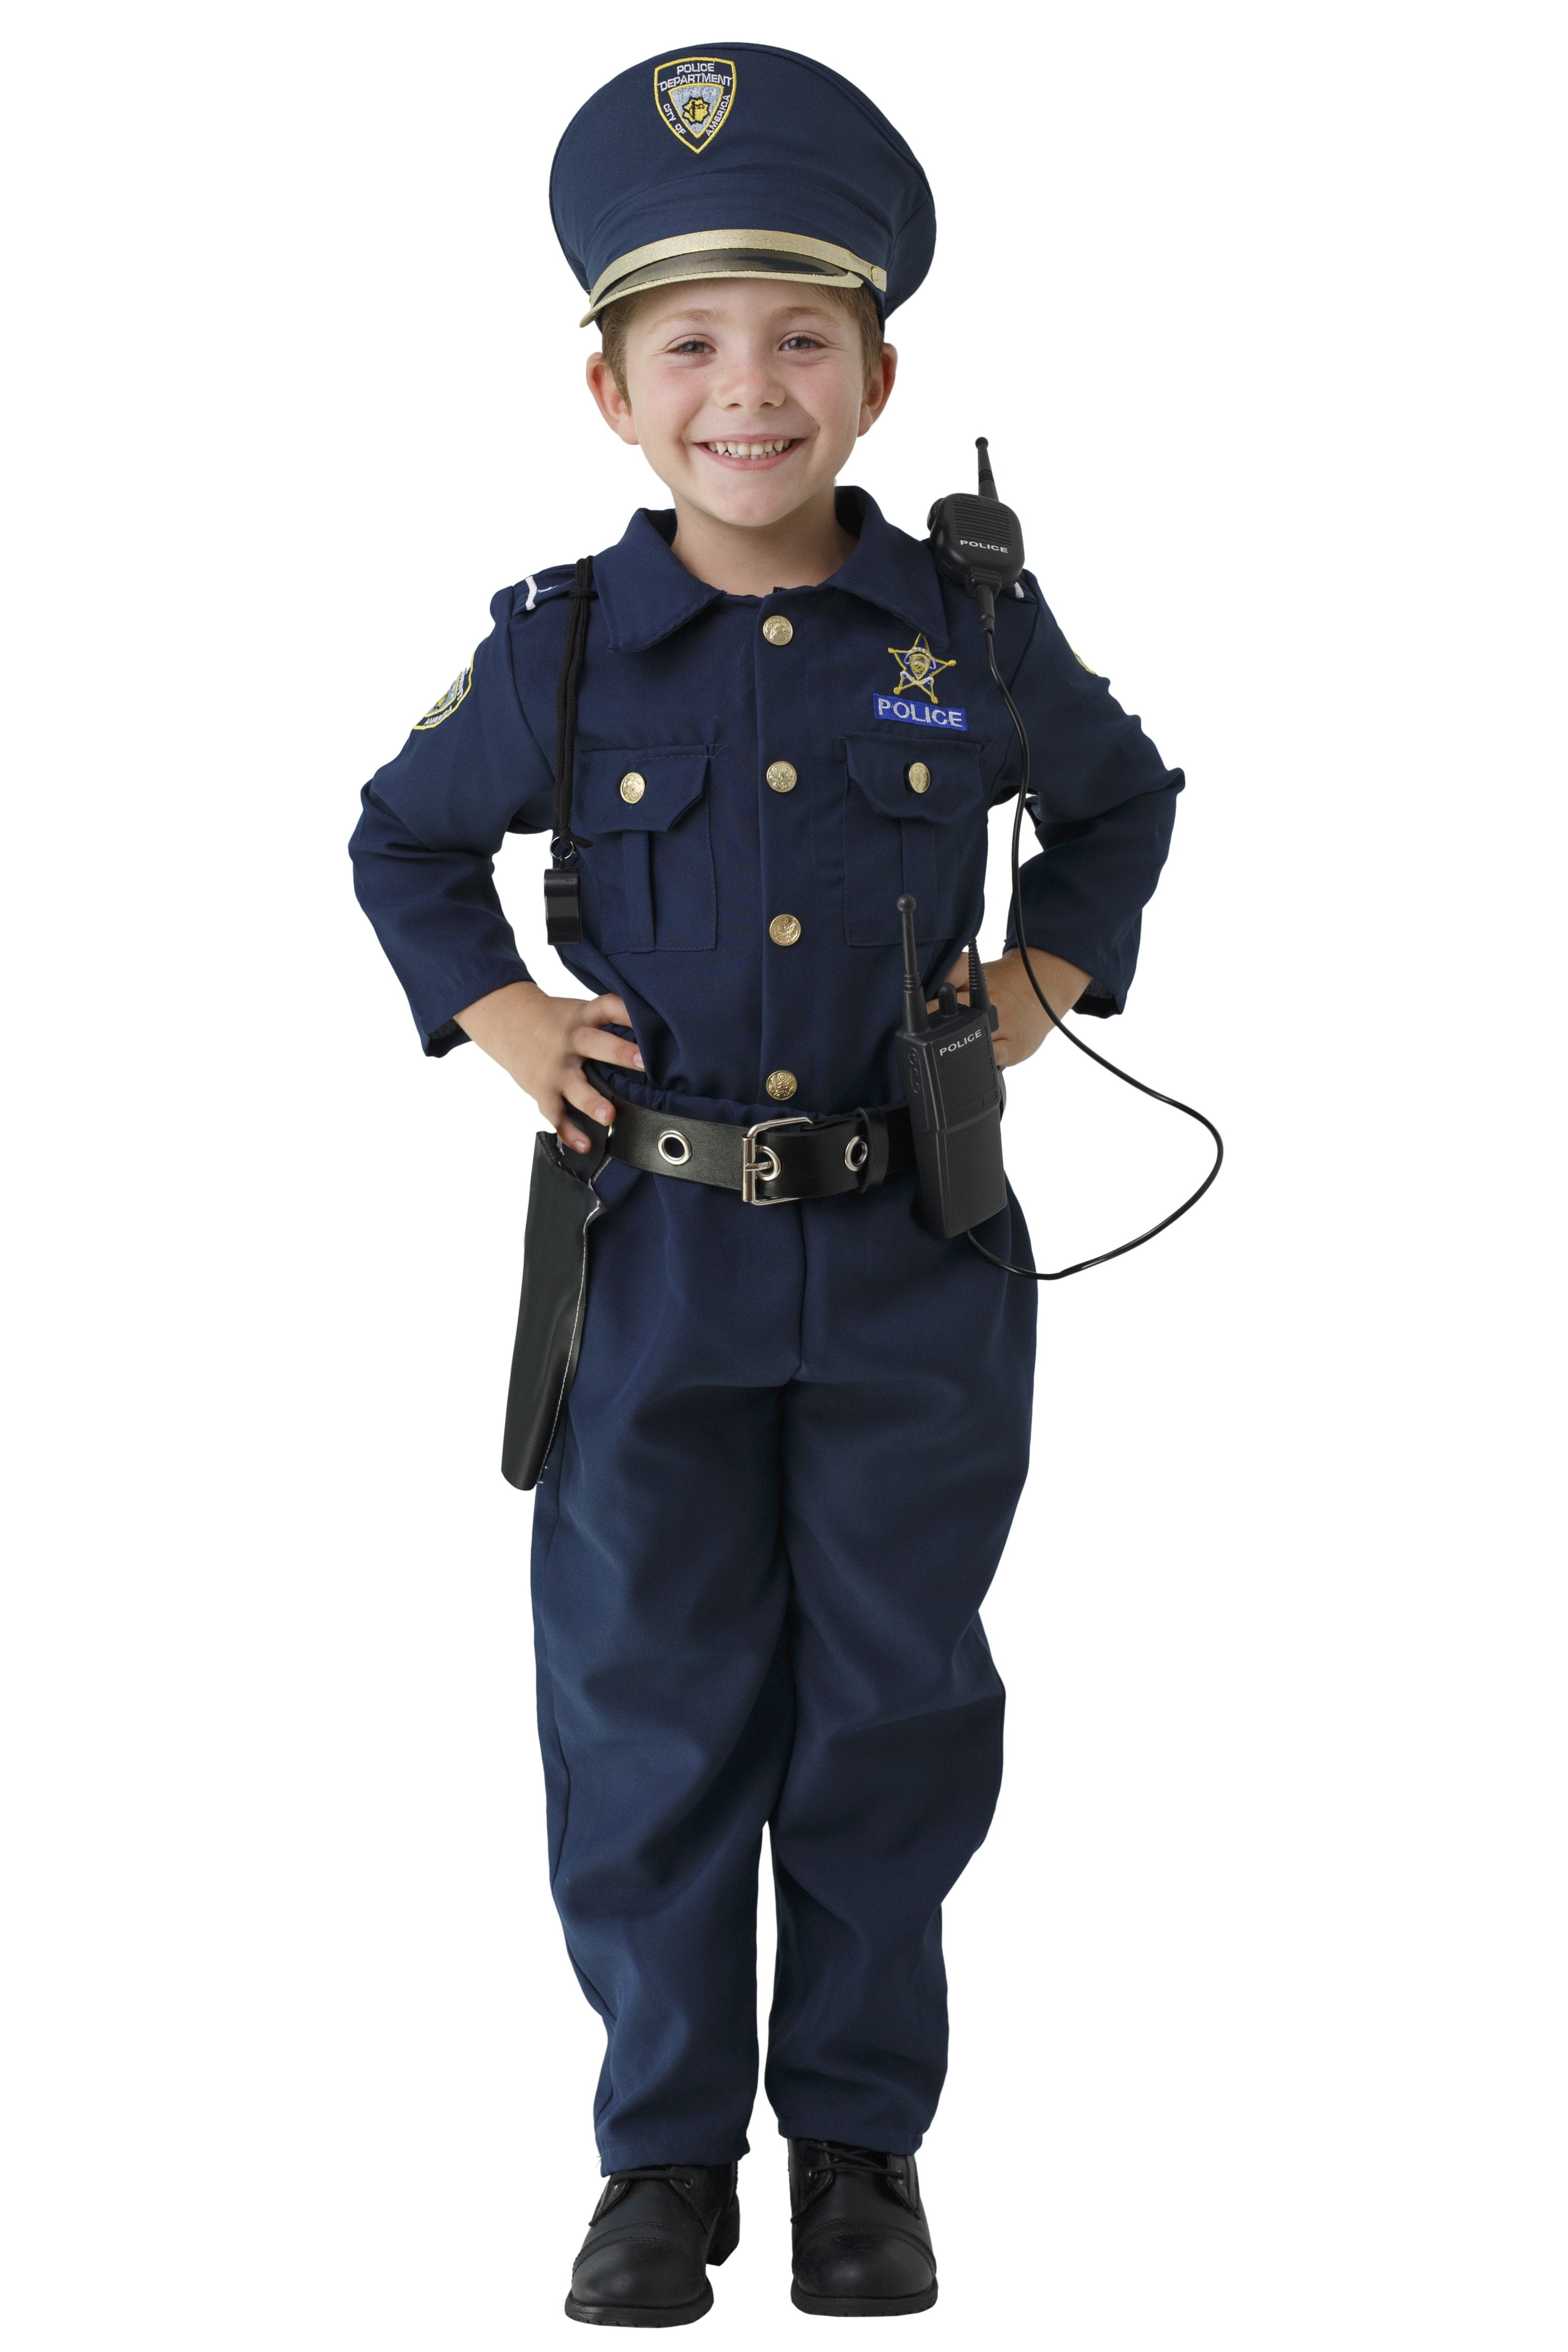 Police Officer Costume Toys Kids Halloween Cosplay Boys Outfit Realistic Toy Set 